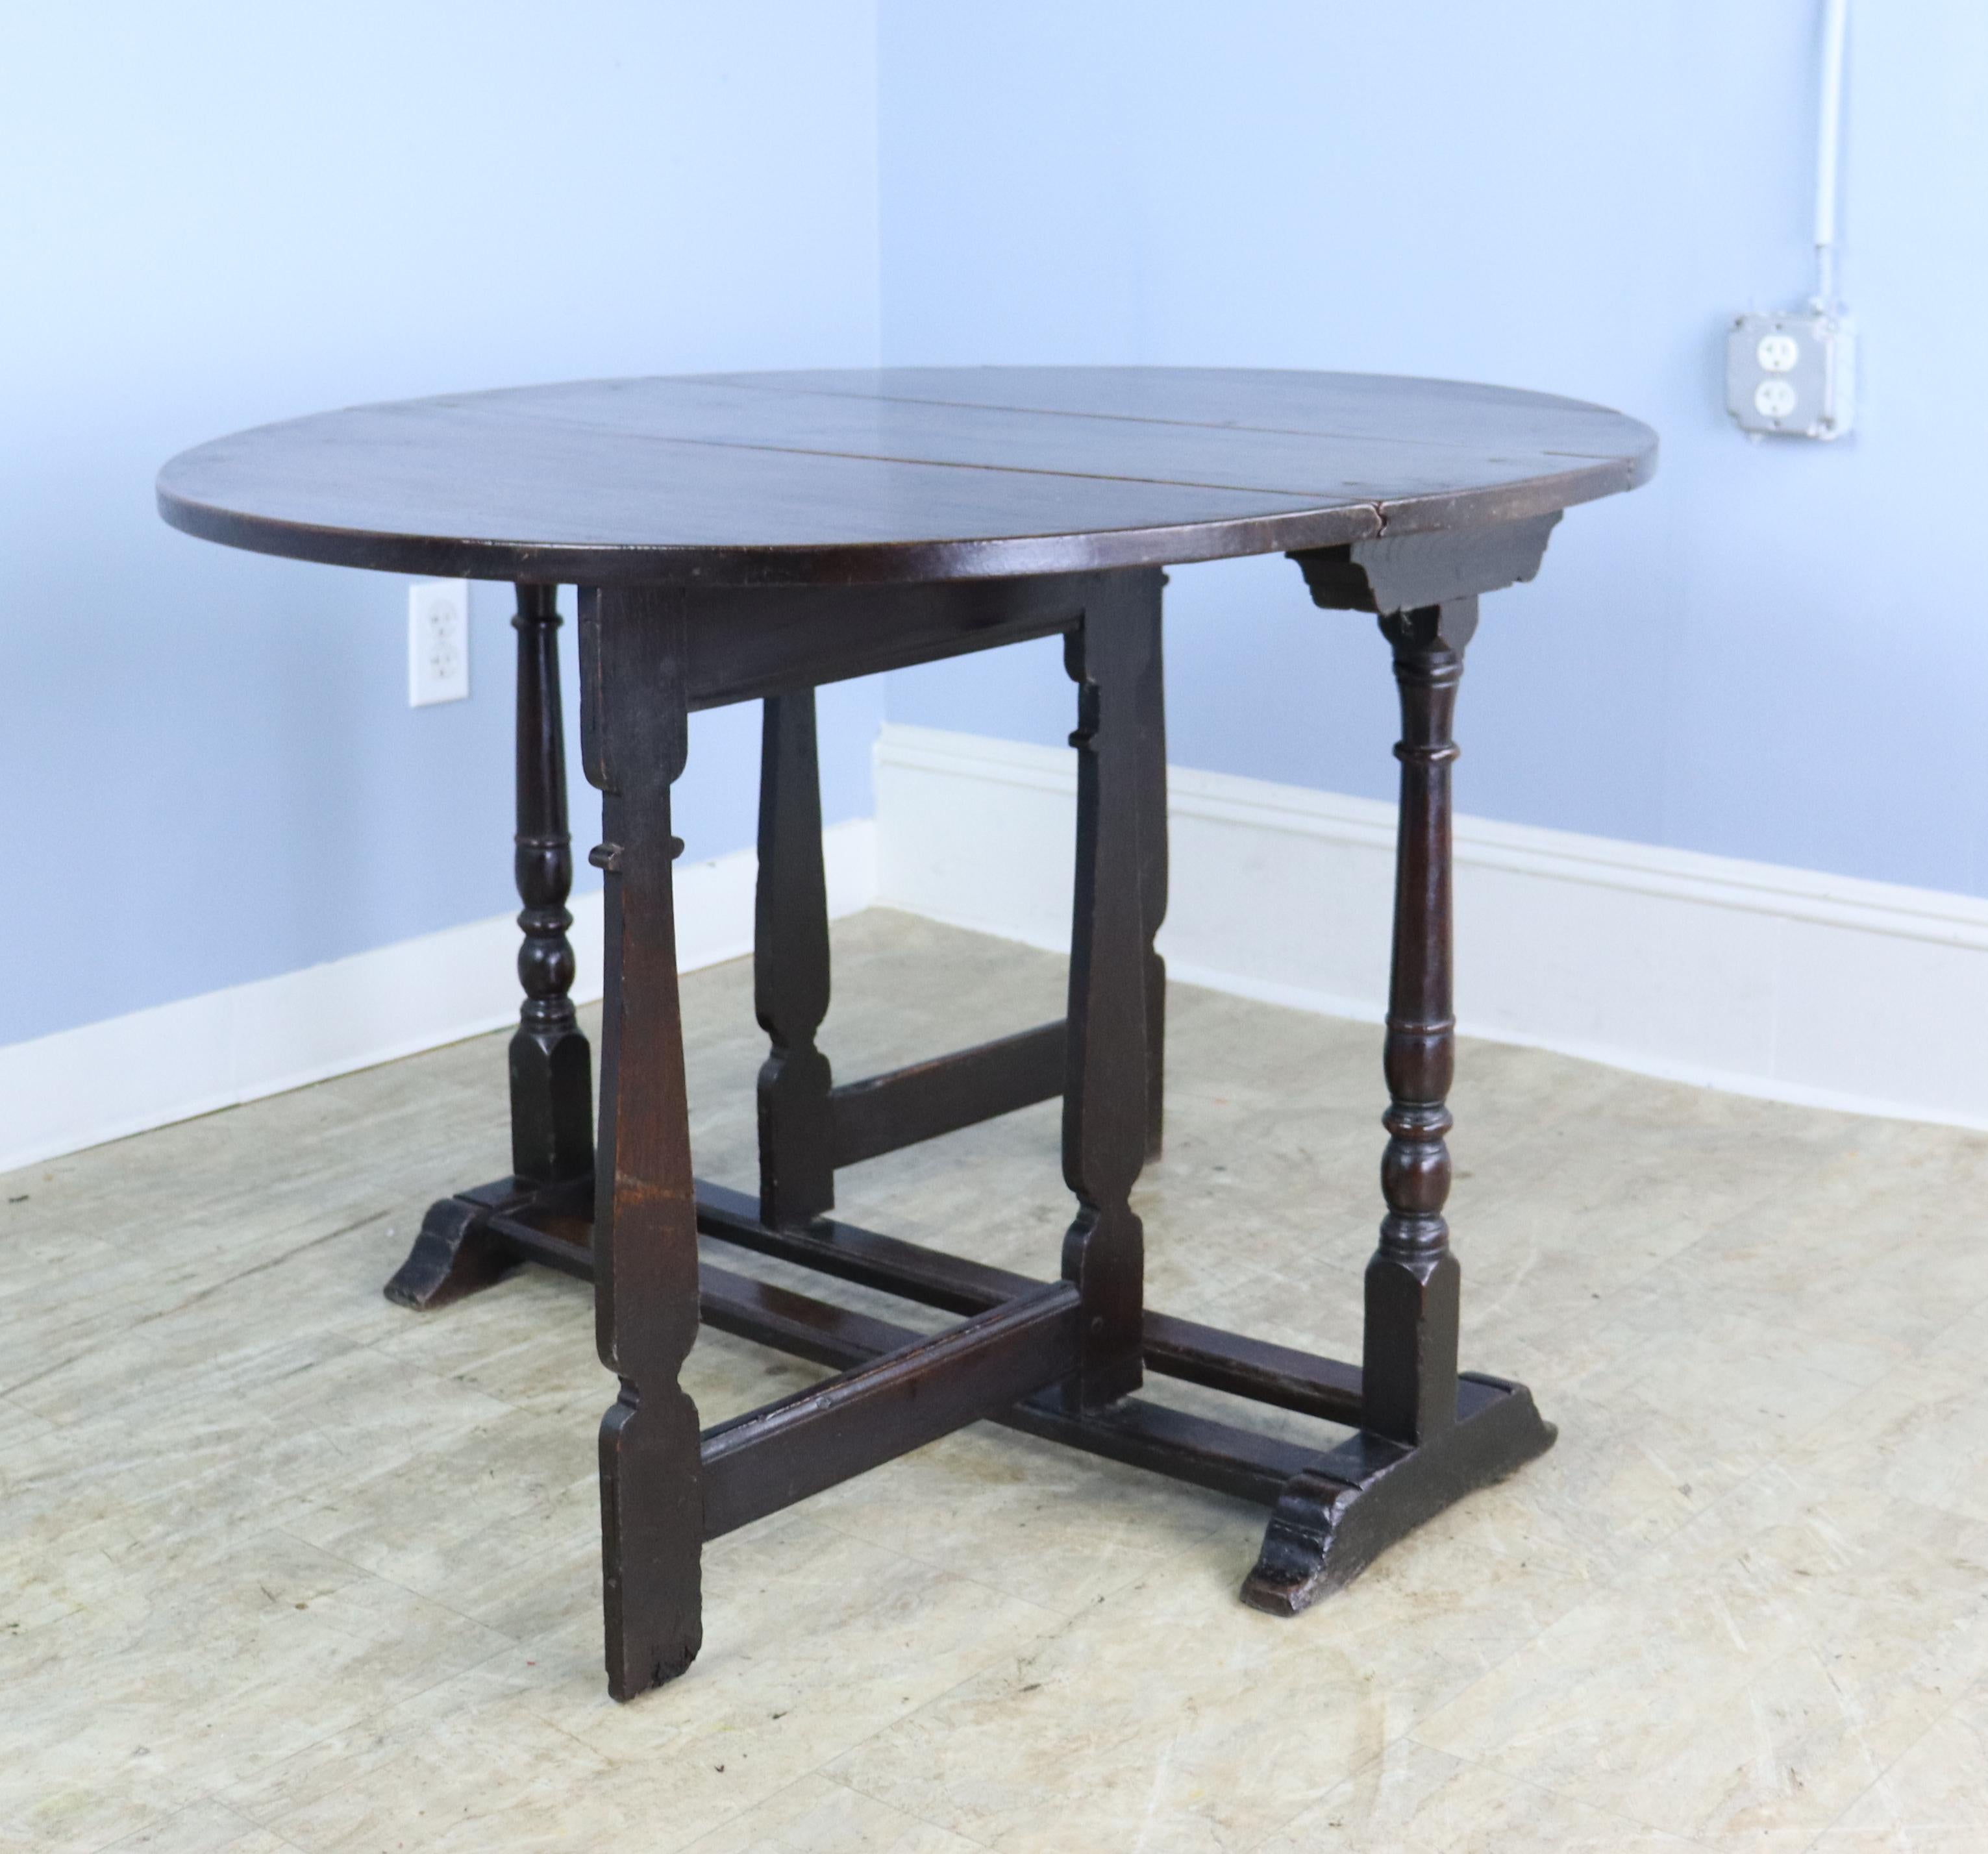 The top of this early oak table is a good size occasional or breakfast table in original condition. This is an example of a very early gateleg, with well proportioned drop leaves and a good folding mechanism. The color is a nice warm oak. Seating